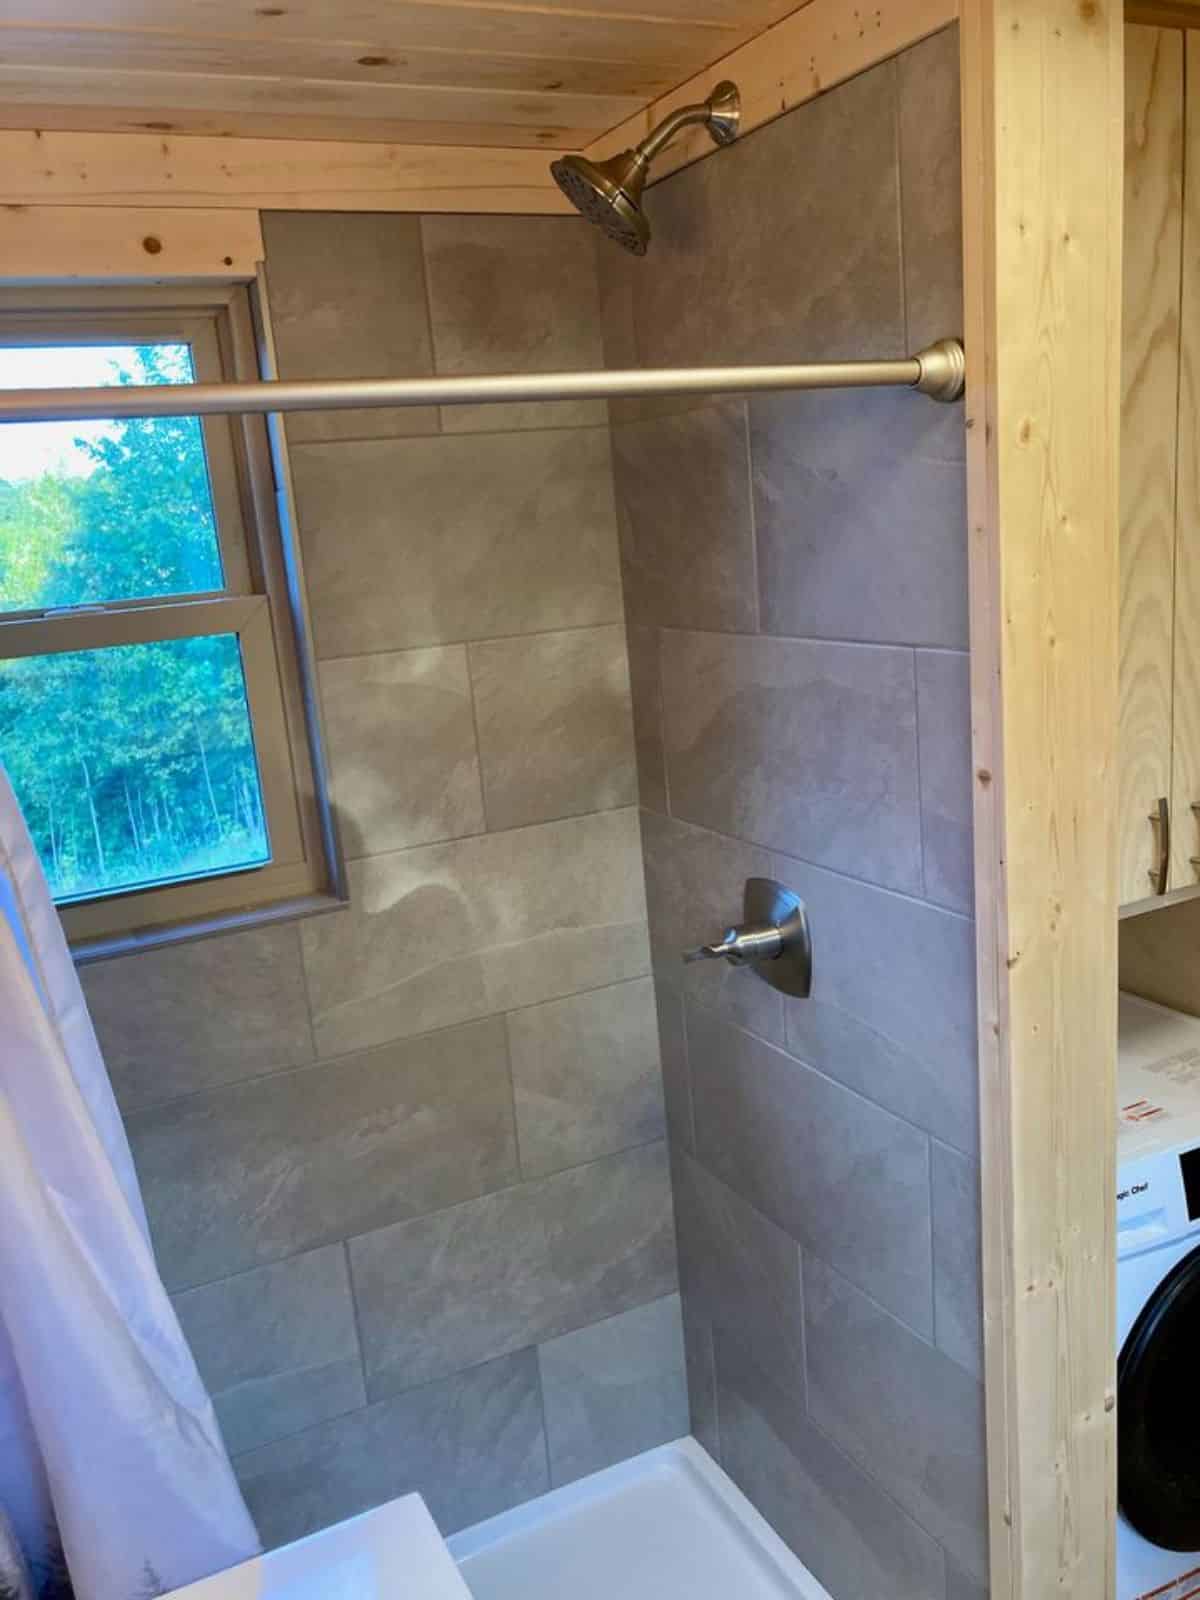 Separate shower area in bathroom of 28’ Tiny Home